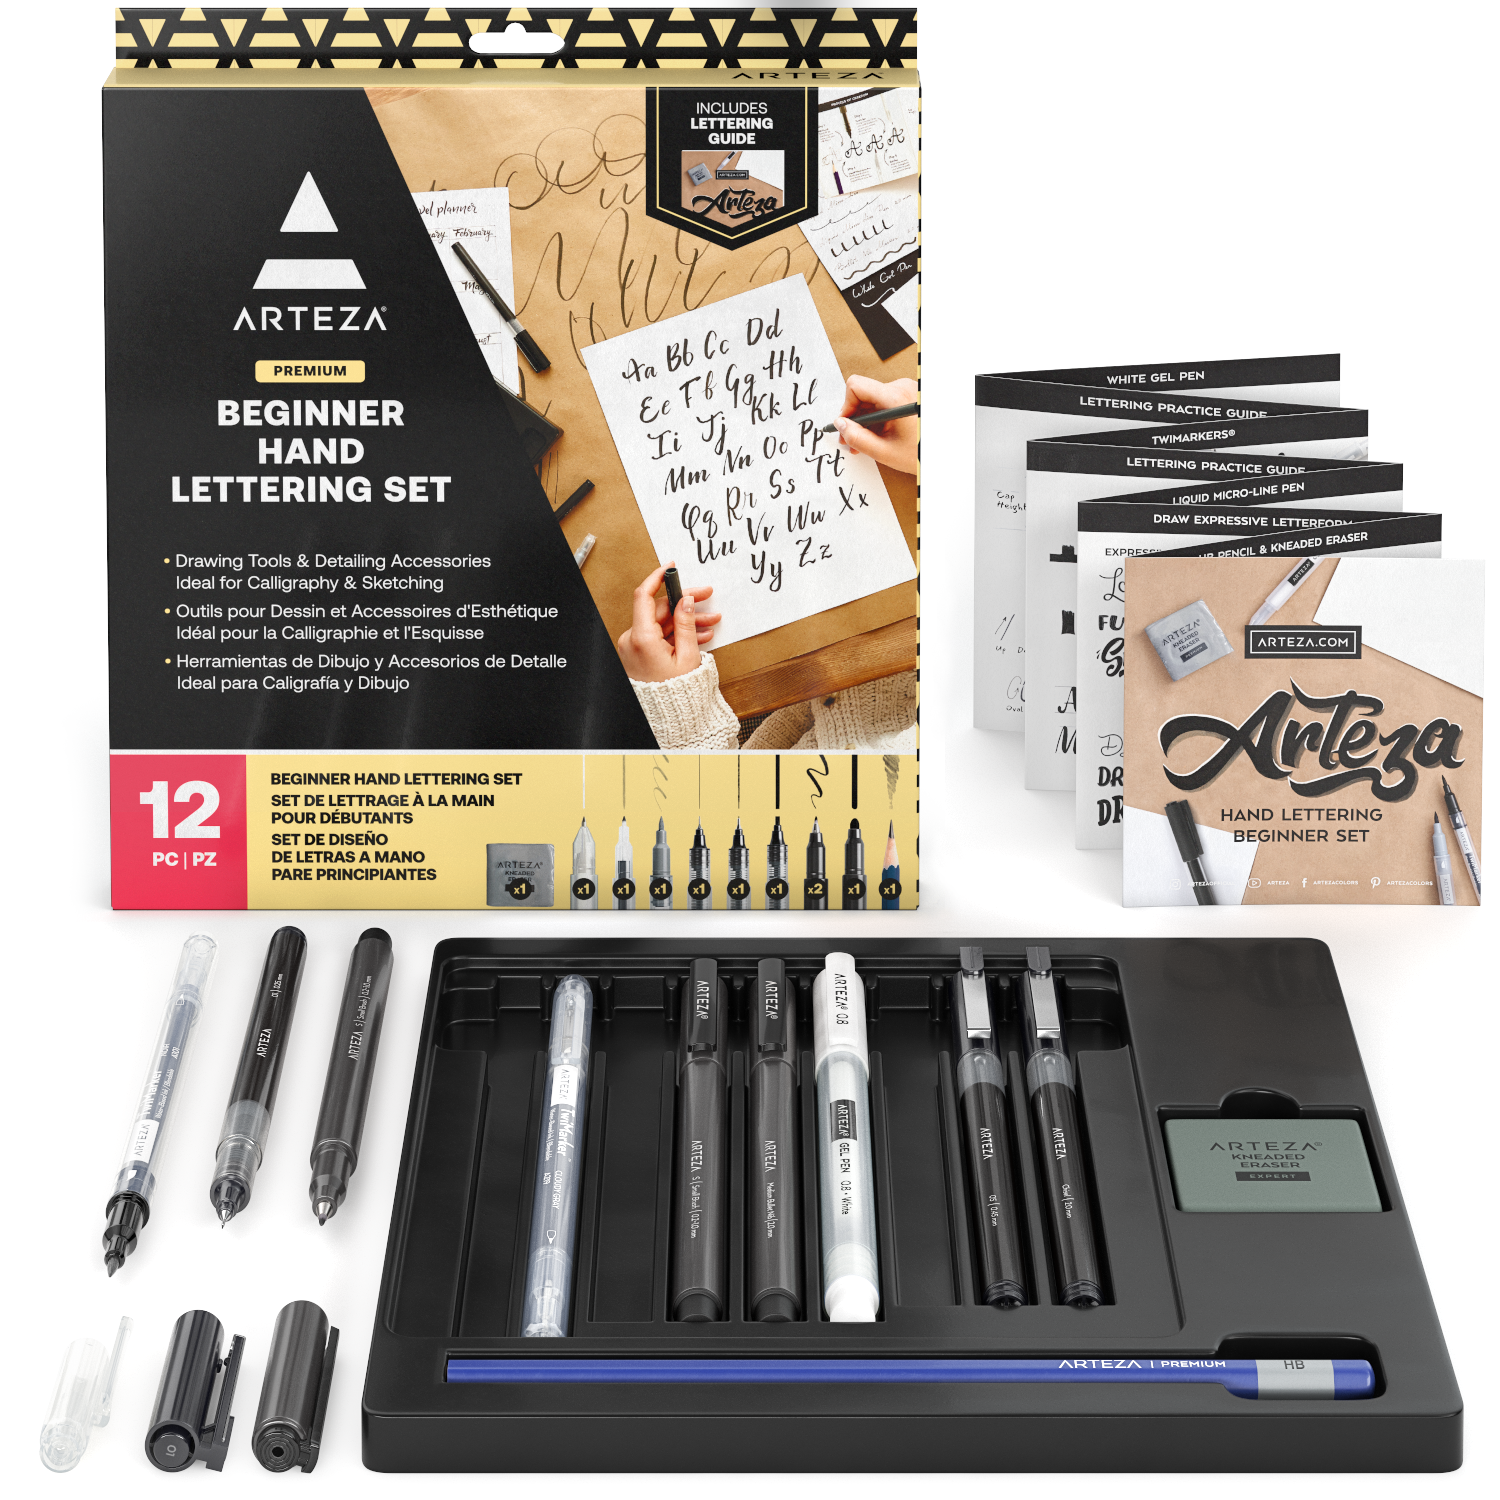 What's the Best Tool for Calligraphy Beginners?